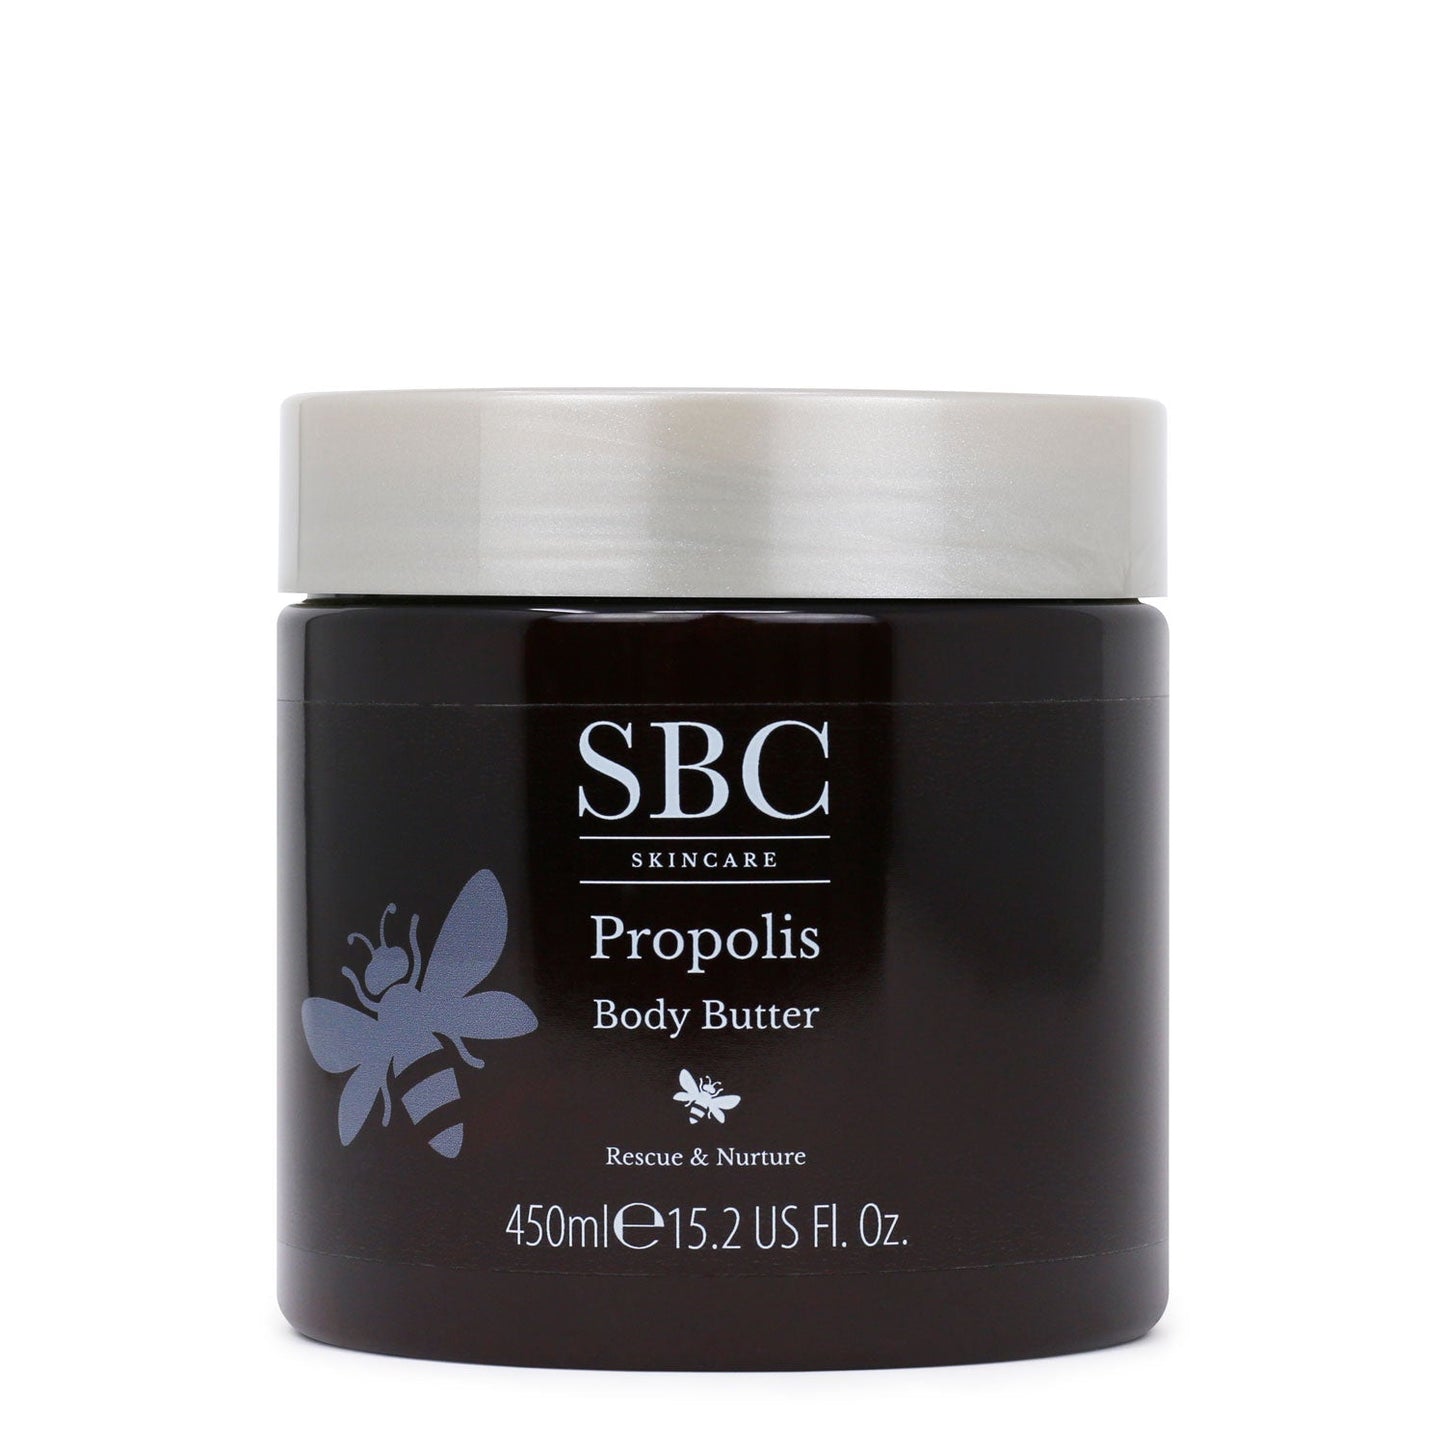 Propolis Body Butter 450ml on a white background 